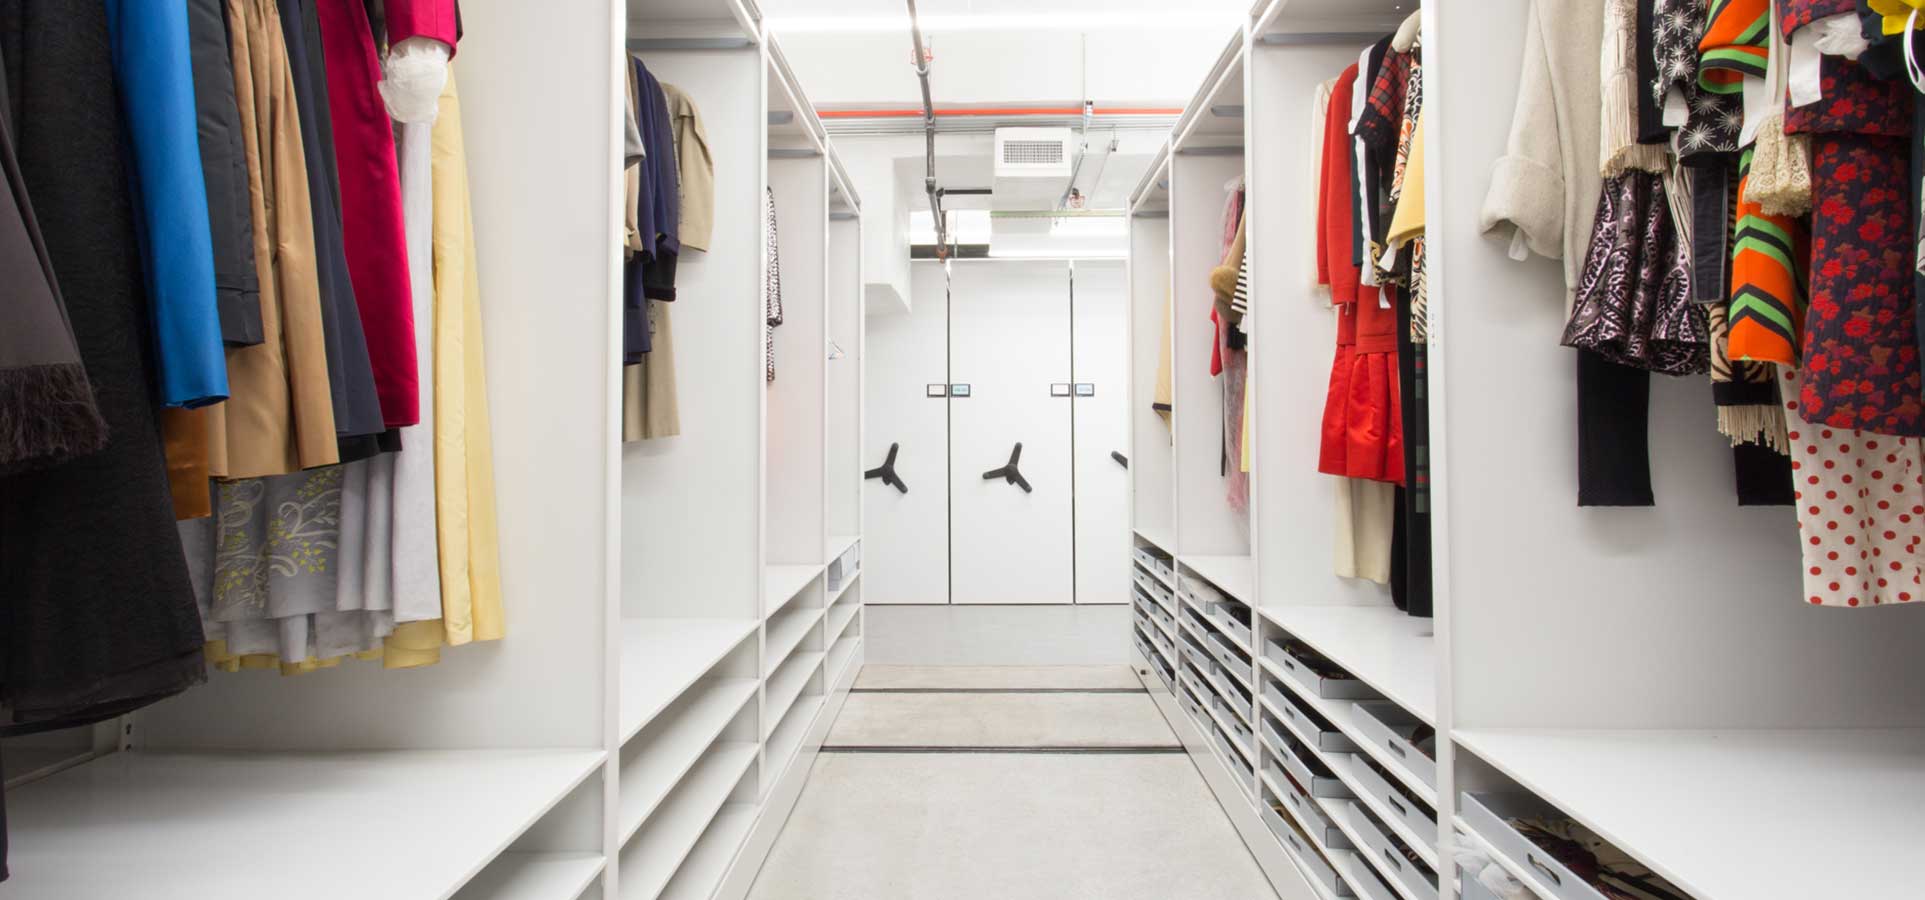 Fashion museum compact hanging storage system